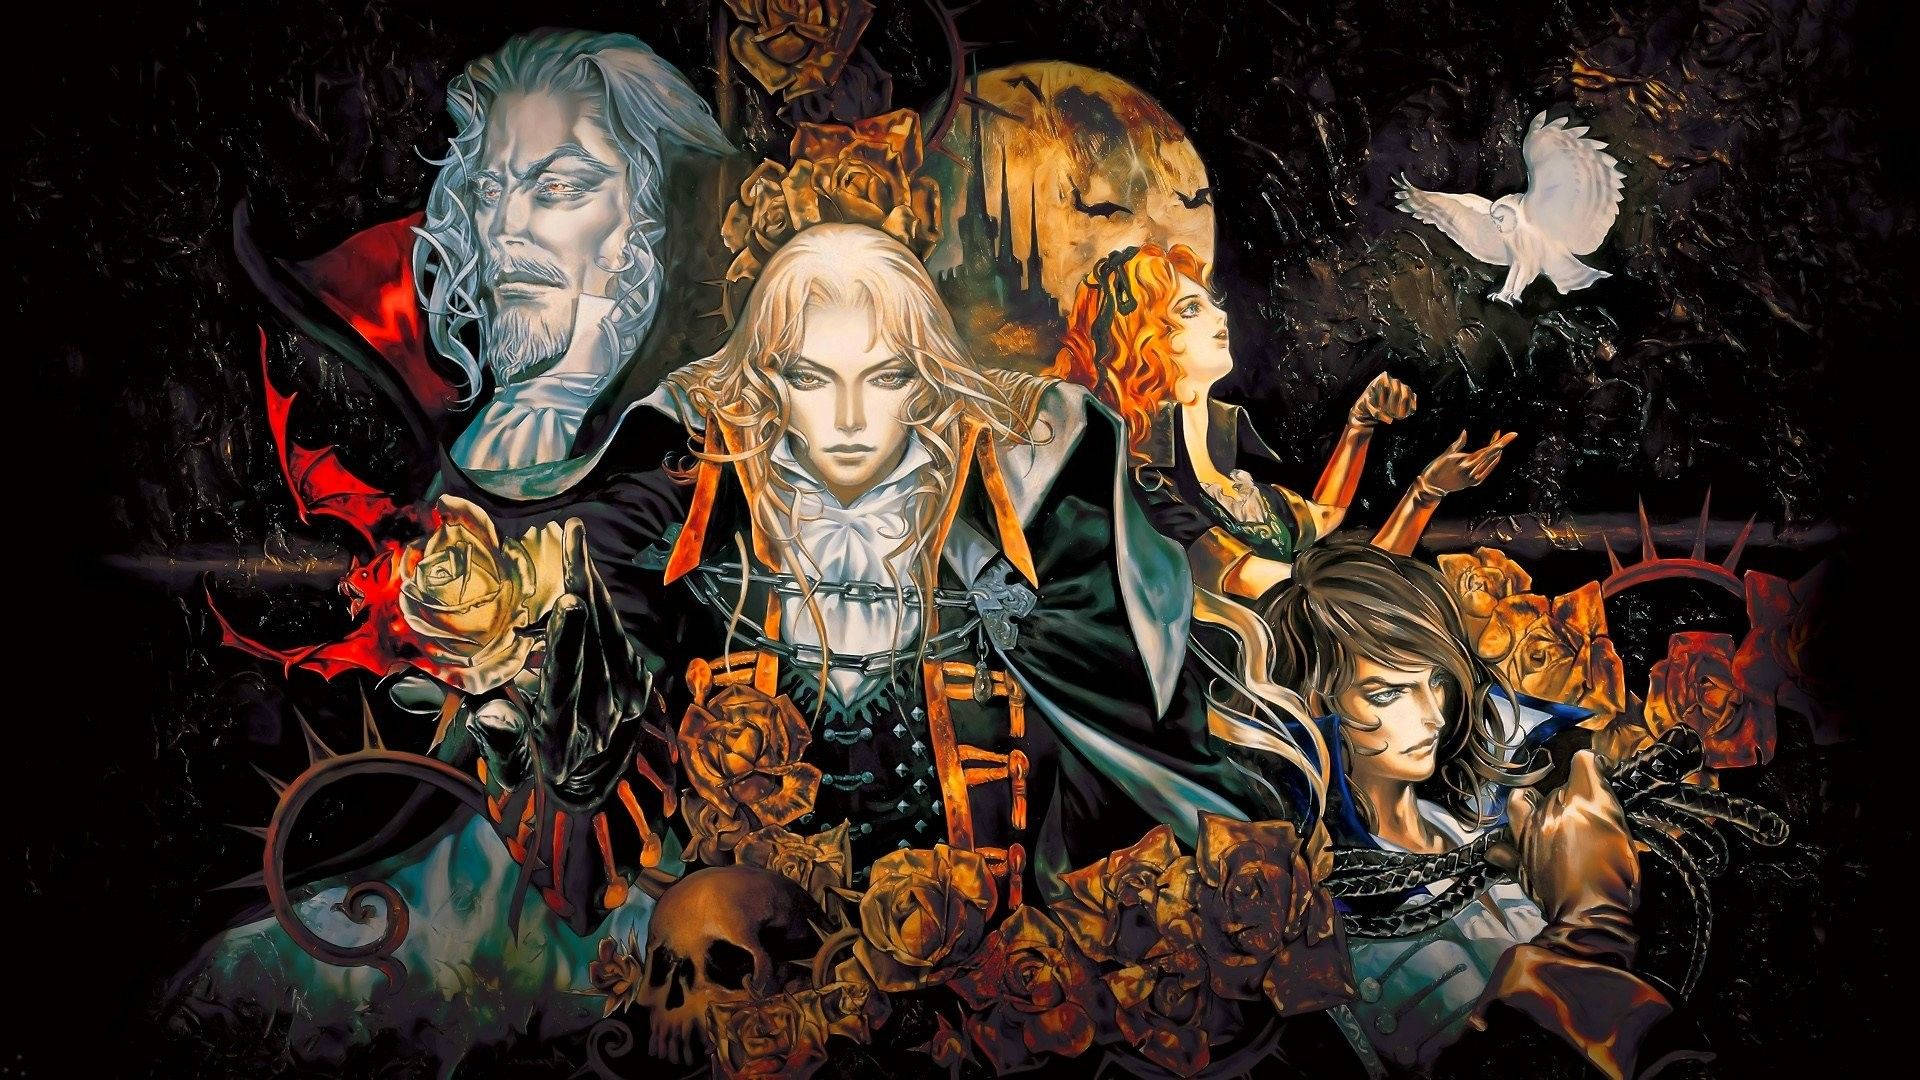 Adventure through the mysterious walls of Castlevania Wallpaper